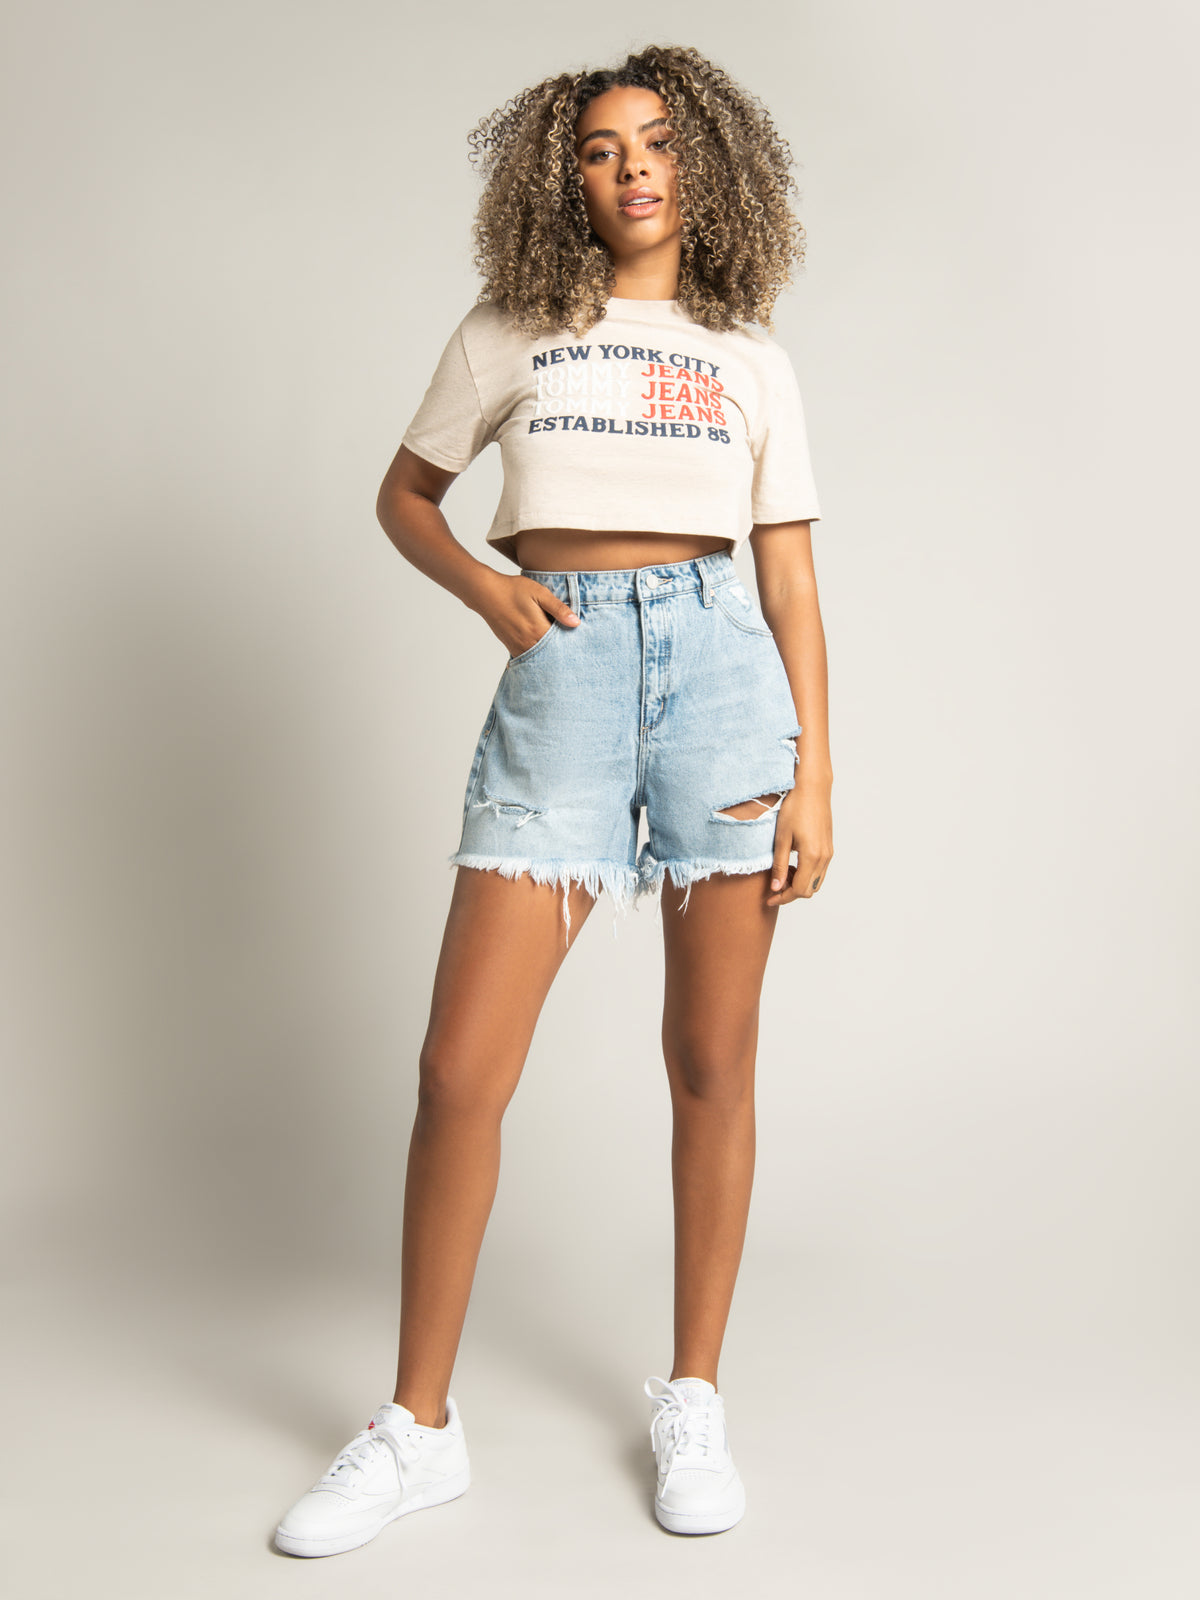 Repeat Logo Crop T-Shirt in Smooth Stone